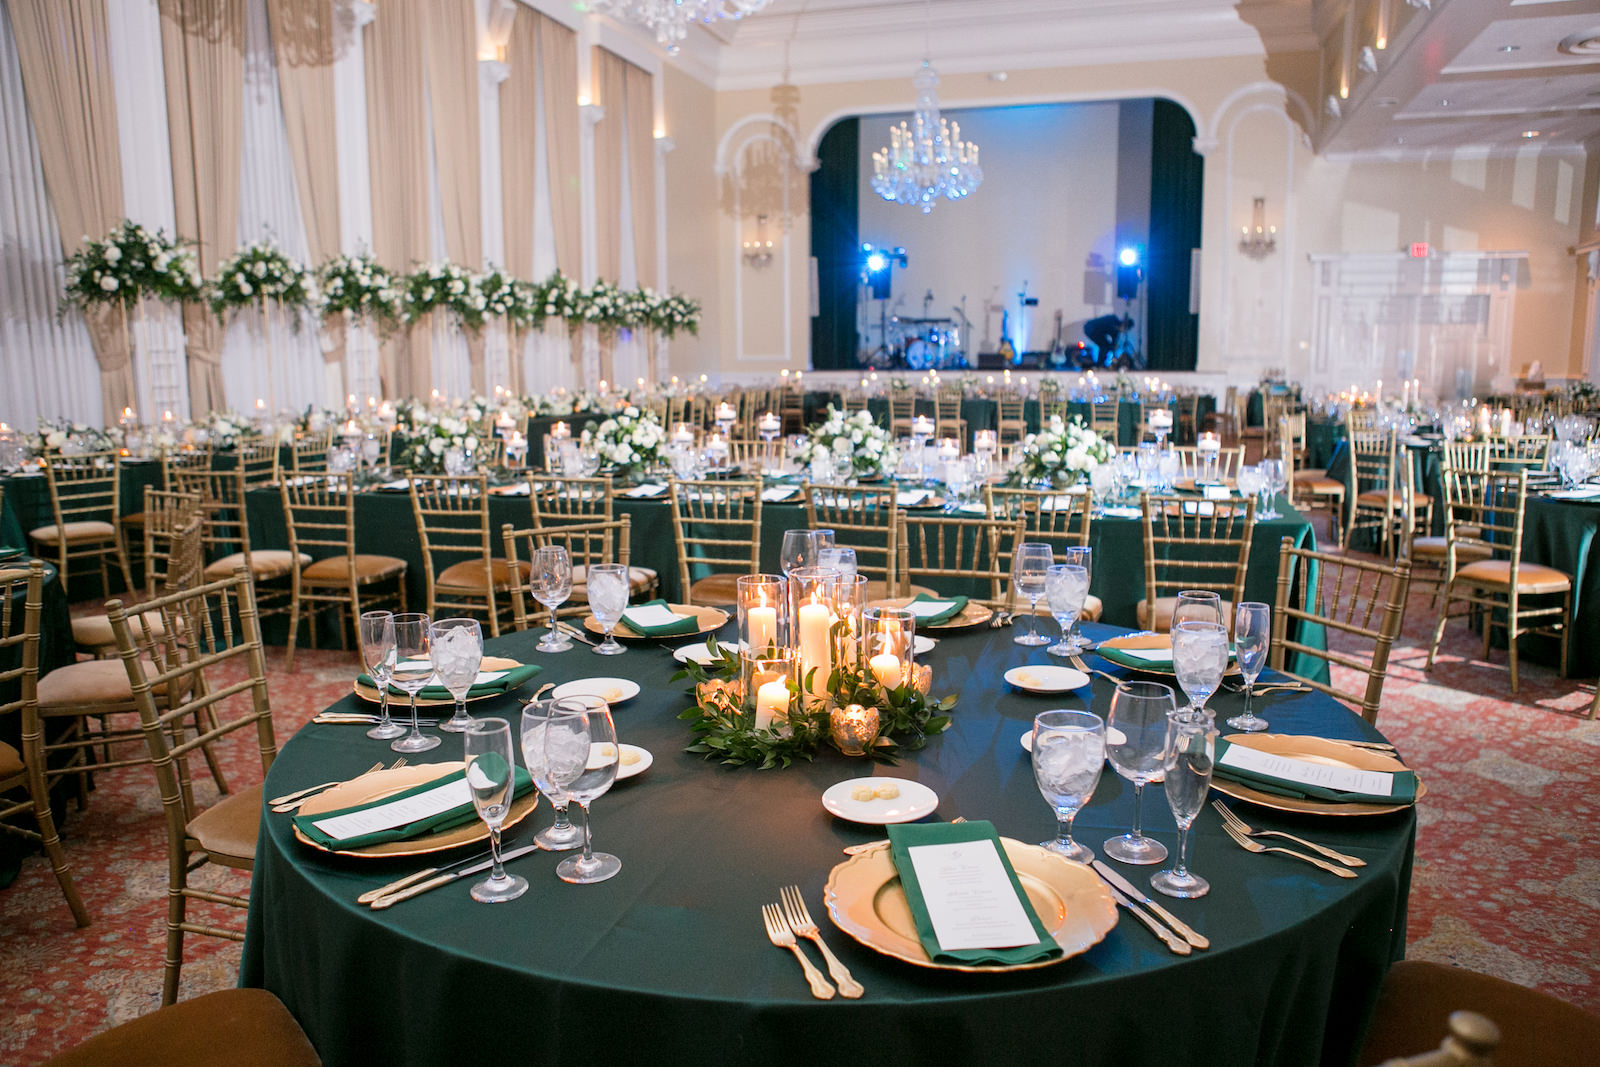 Green and Gold Christmas Wedding Decor, Long and Round Tables with Emerald Green Table Linens, Gold Chiavari Chairs, Gold Chargers, White and Greenery Low and Tall Floral Centerpieces, Gold Monogram on Dance Floor | Tampa Bay Wedding Photographer Carrie Wildes Photography | Wedding Rentals Kate Ryan Event Rentals | Over the Top Rental Linens | A Chair Affair Event Rentals | Tampa Wedding Venue Palma Ceia Golf & Country Club